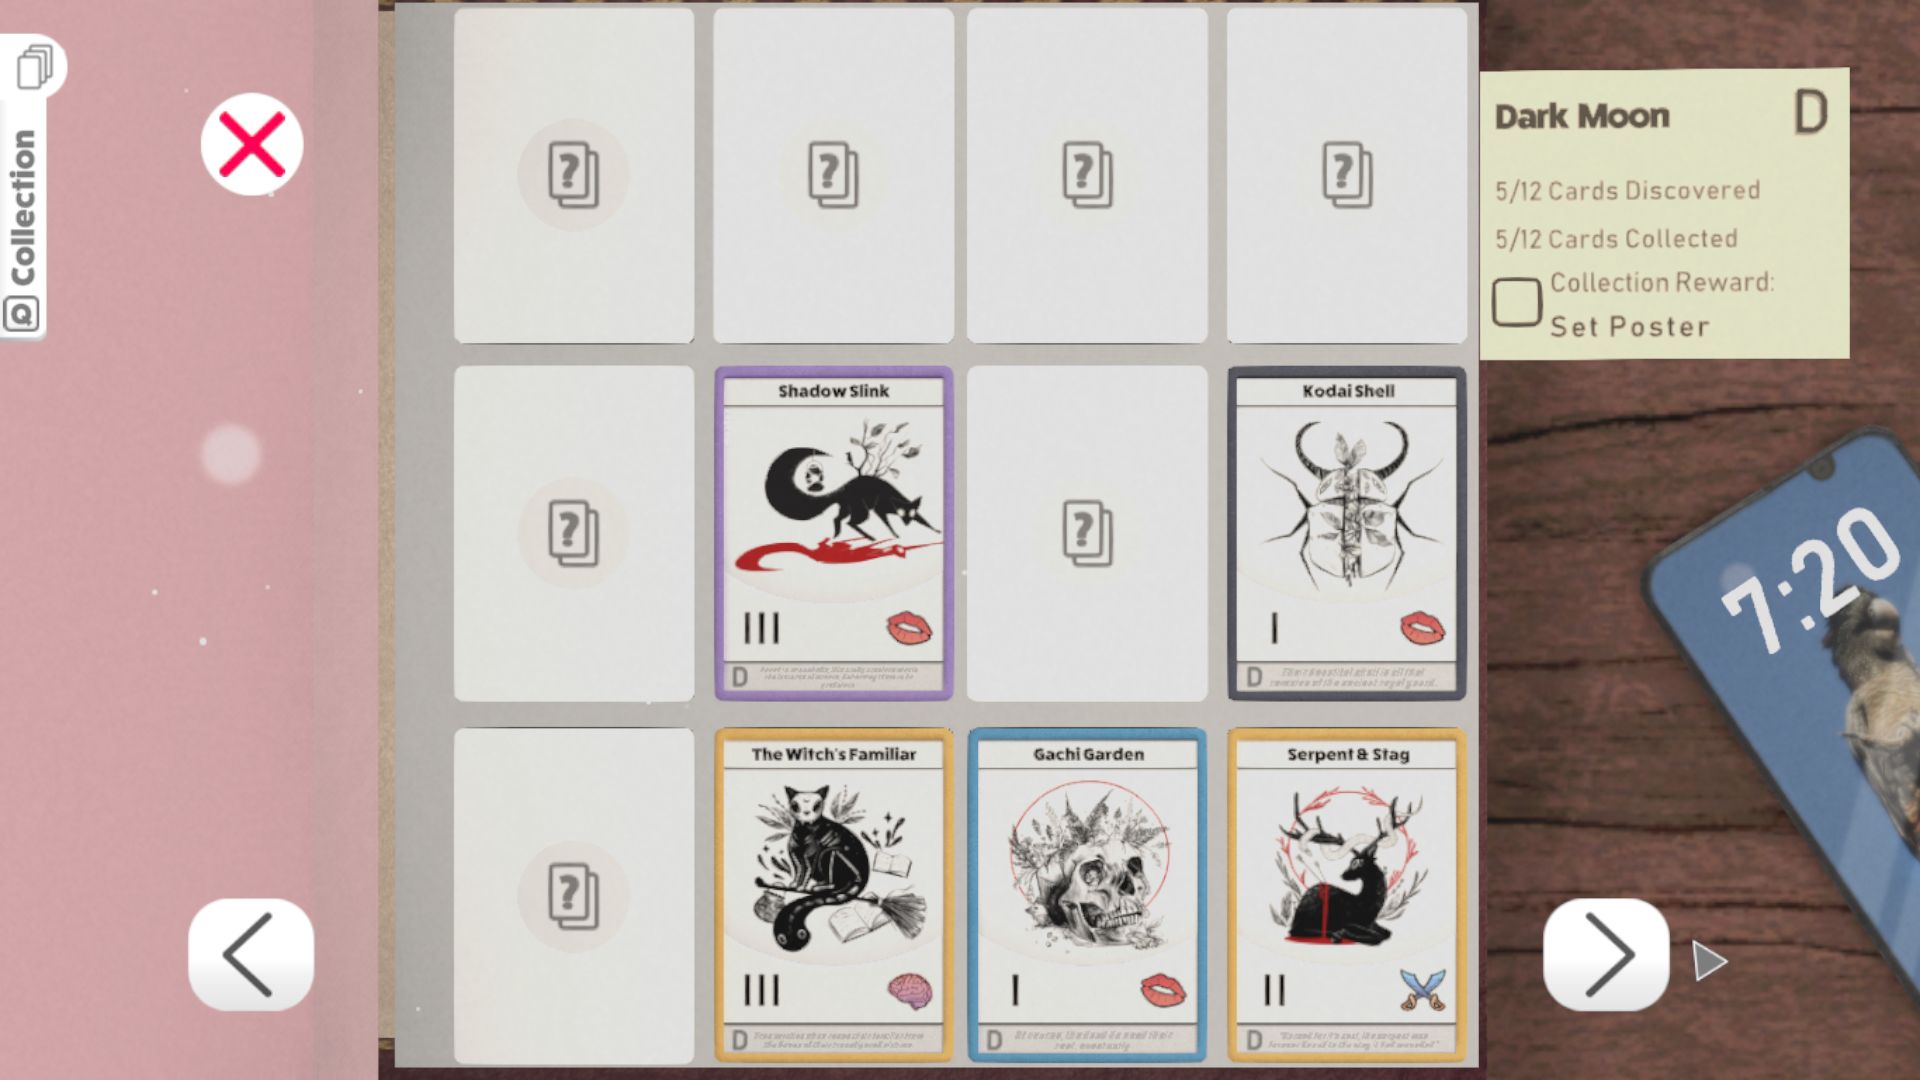 A collection of cards in Kardboard Kings, stored in a trading card binder, from a collection called Dark moon. They're black and grey line drawings of magical looking animals - a fox with trees growing out of its back, a close up of a beetle full of leaves, a cat sitting on a broom